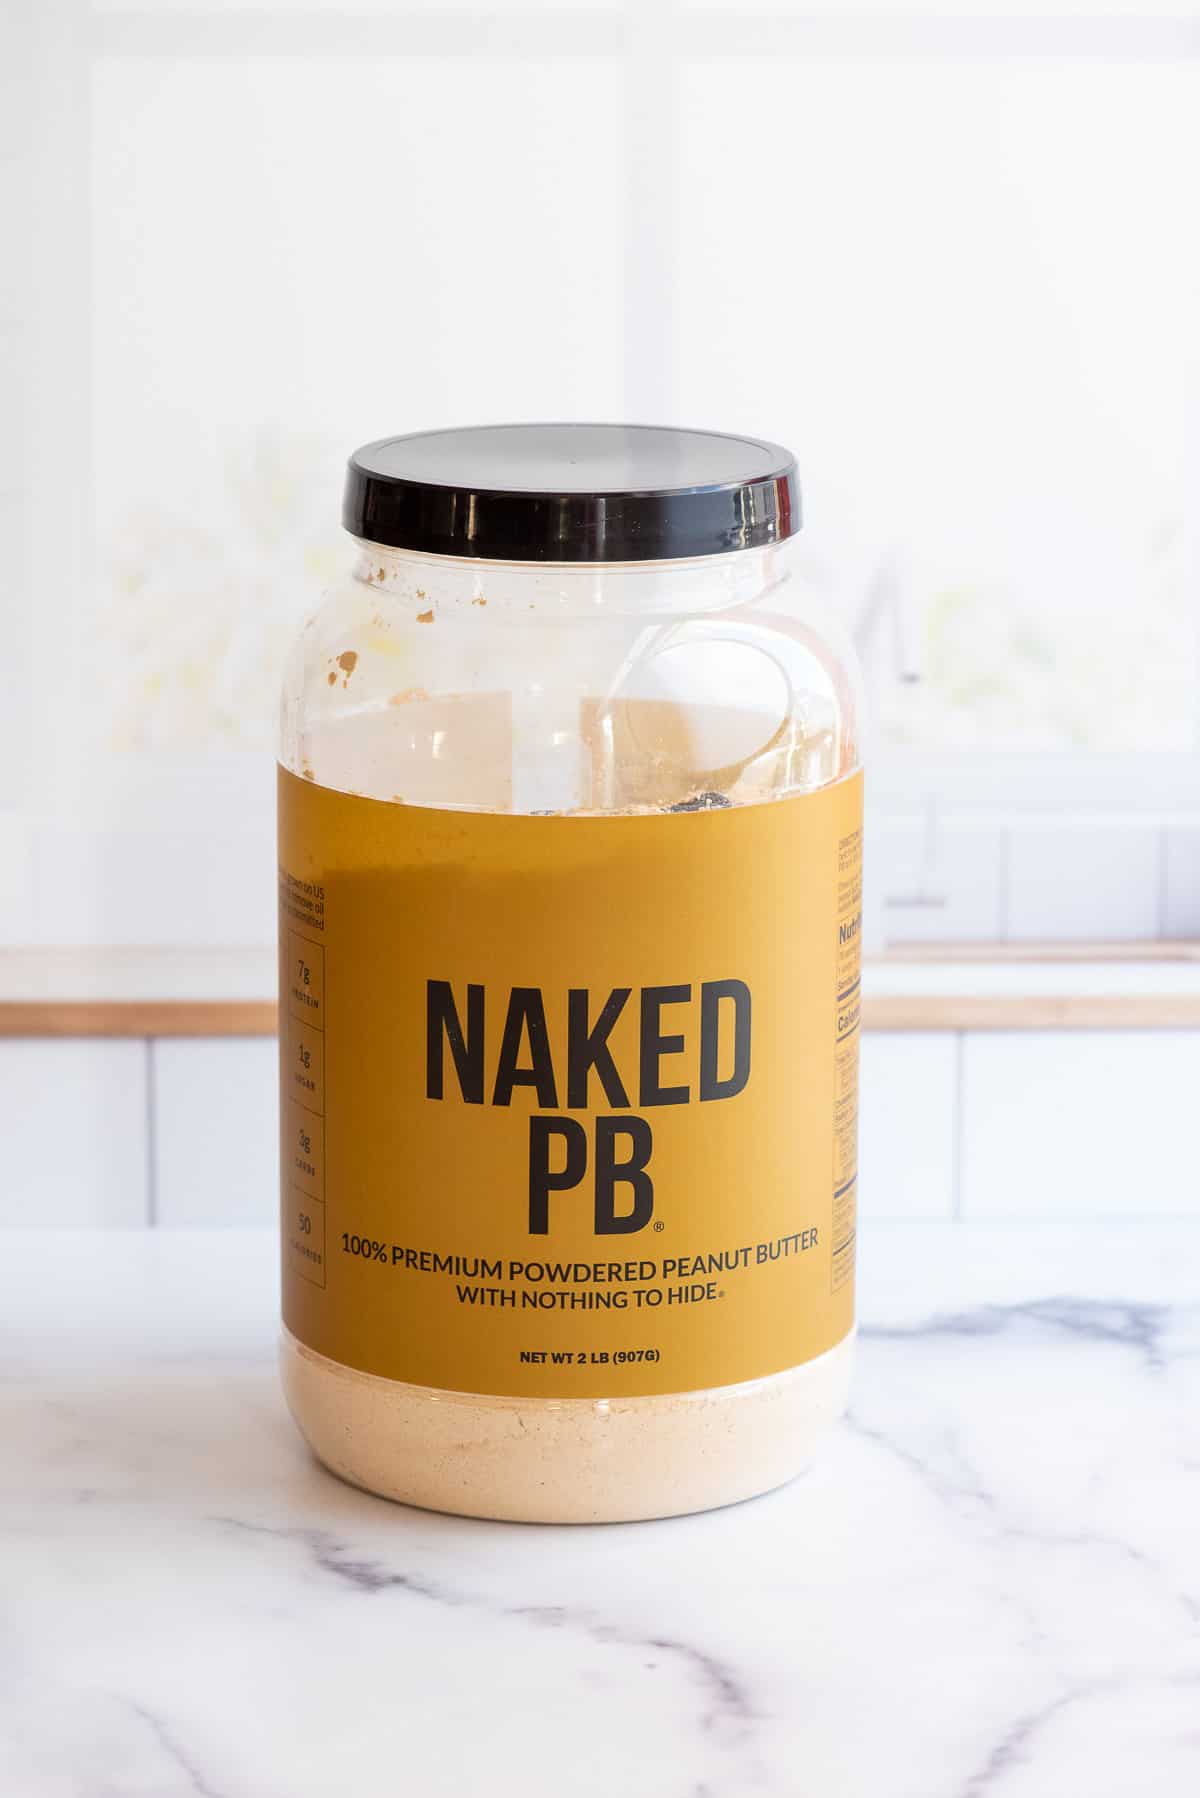 Naked PB packaging front.